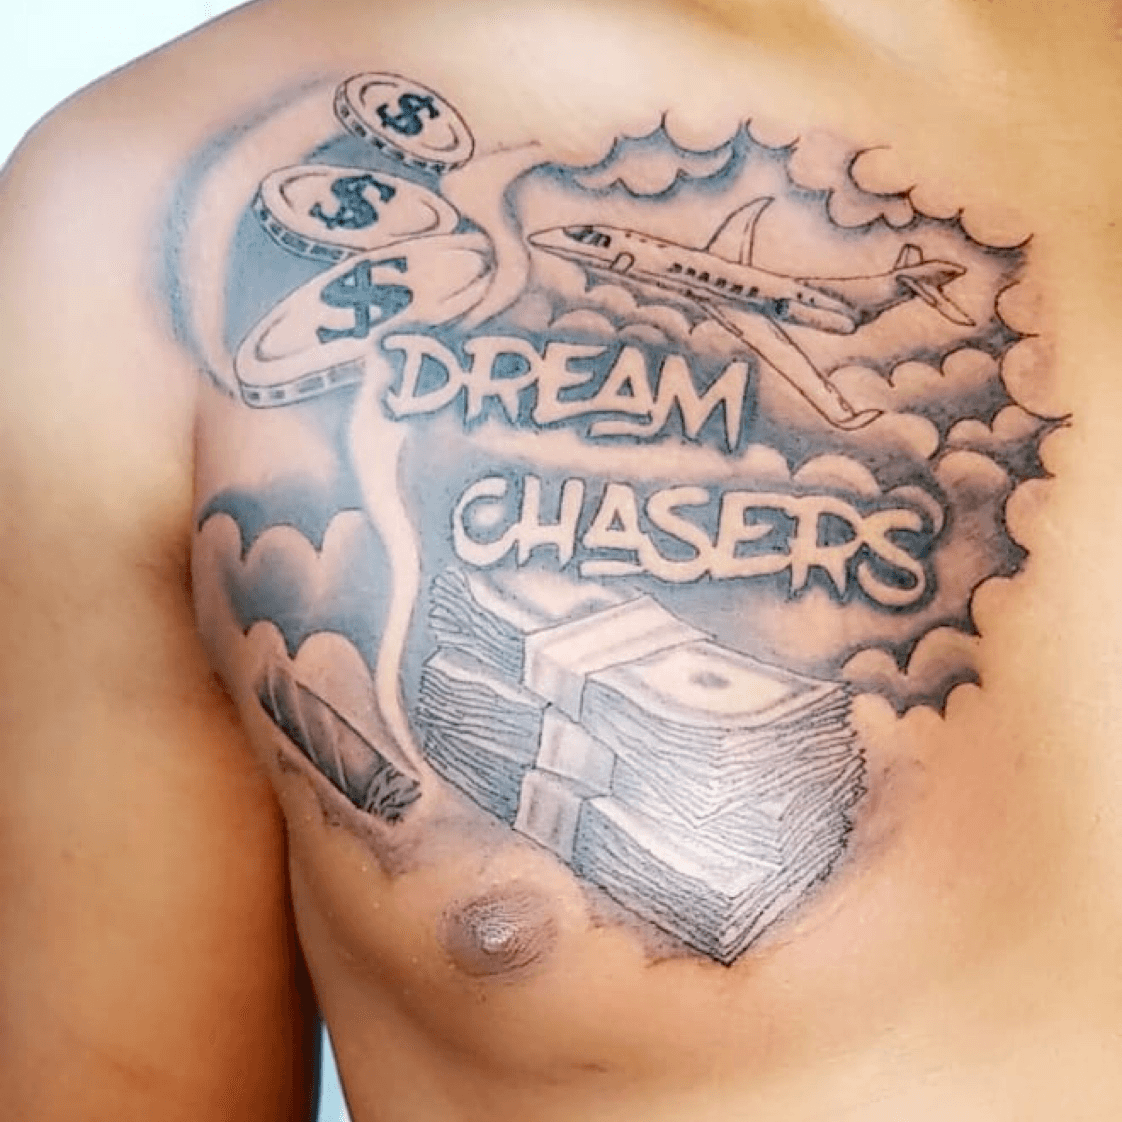 Teens dream tattoo goes viral for all the wrong reasons